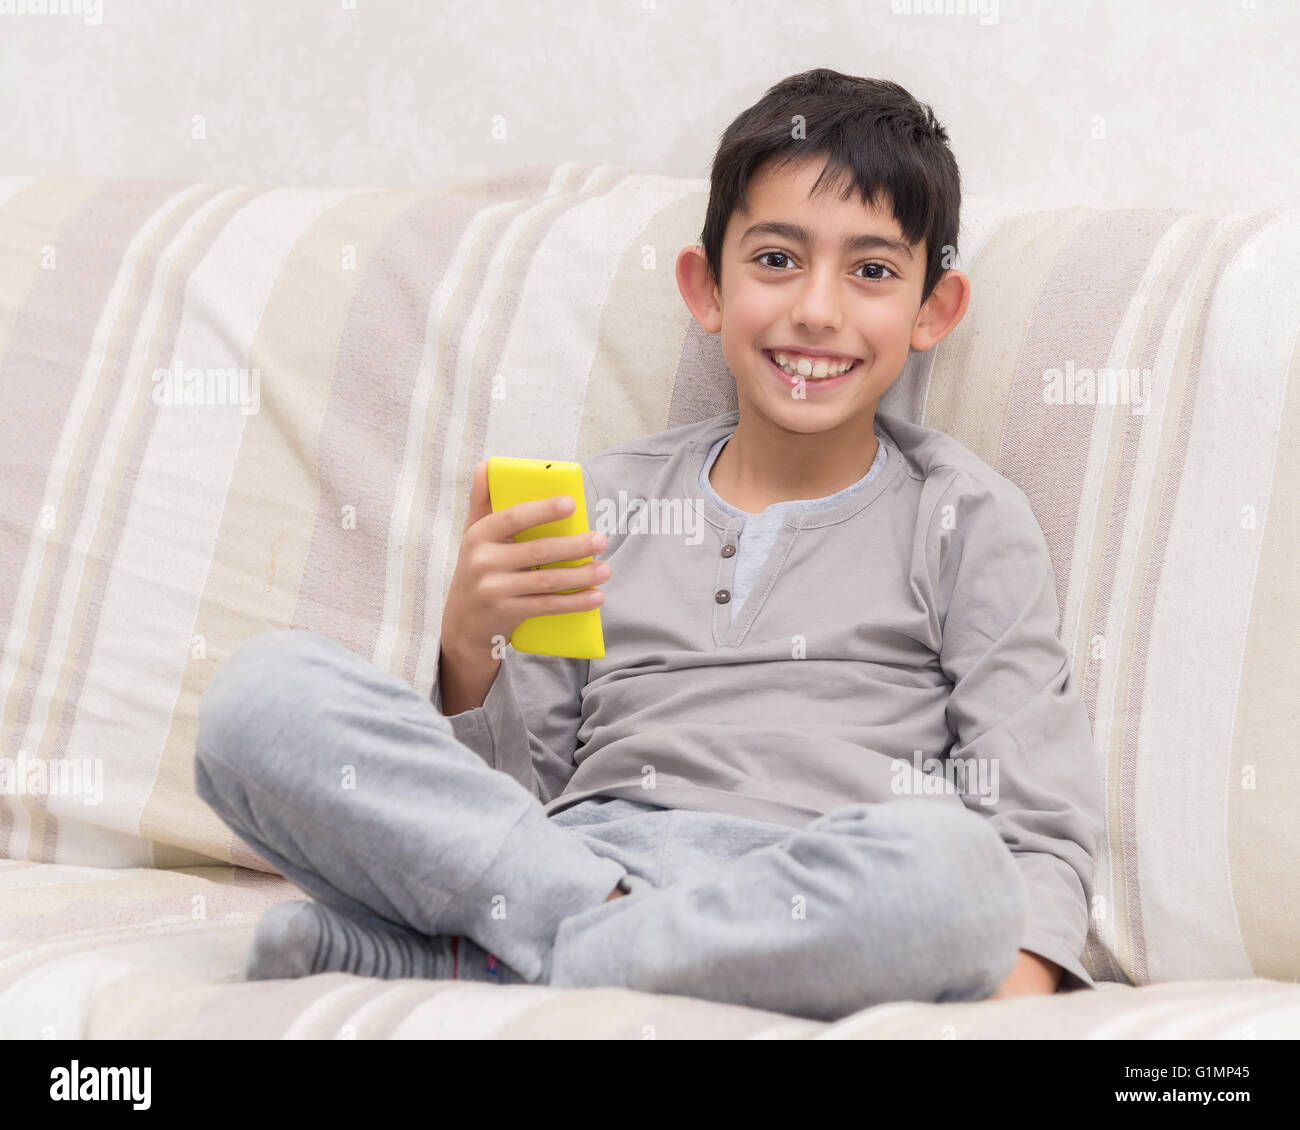 Smiling Young boy with smart phone Banque D'Images